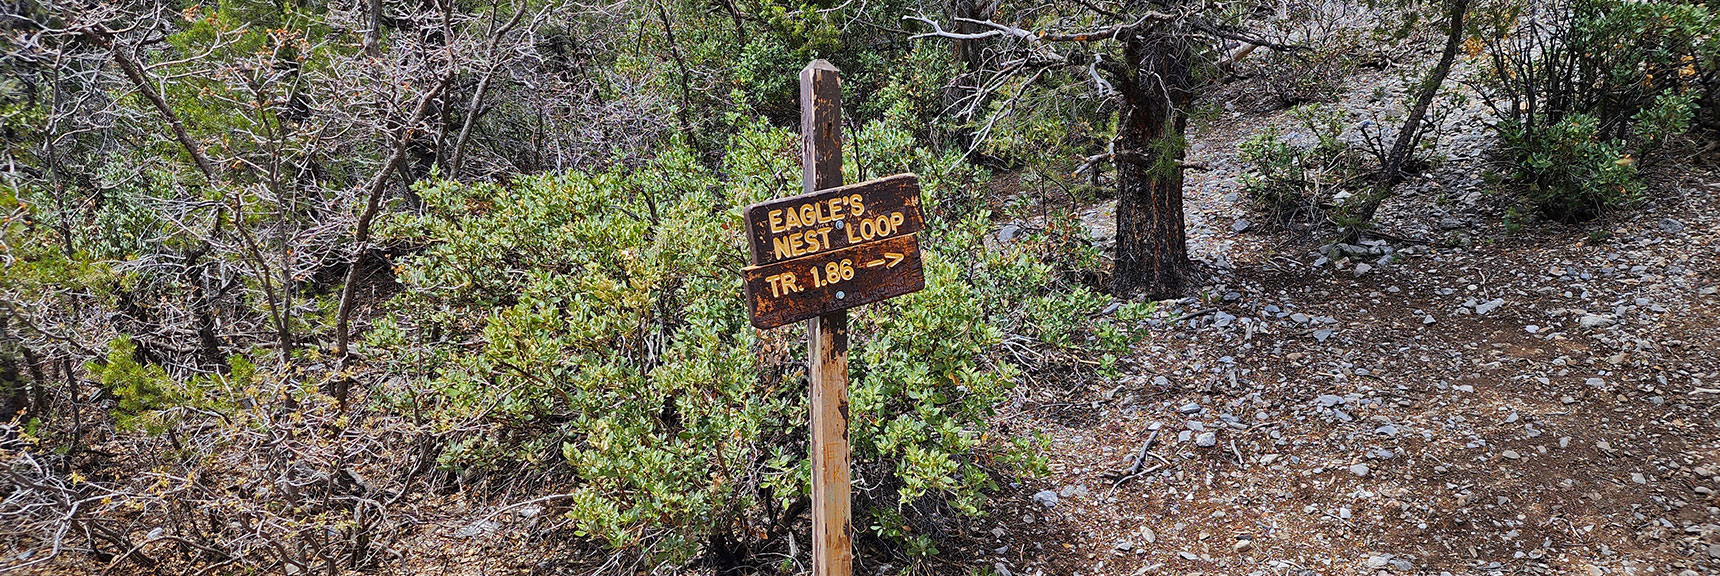 Eagle's Nest Loop Trailhead About 1/4th Mile Up Fletcher Canyon Trail | Eagles Nest Loop | Mt Charleston Wilderness | Spring Mountains, Nevada